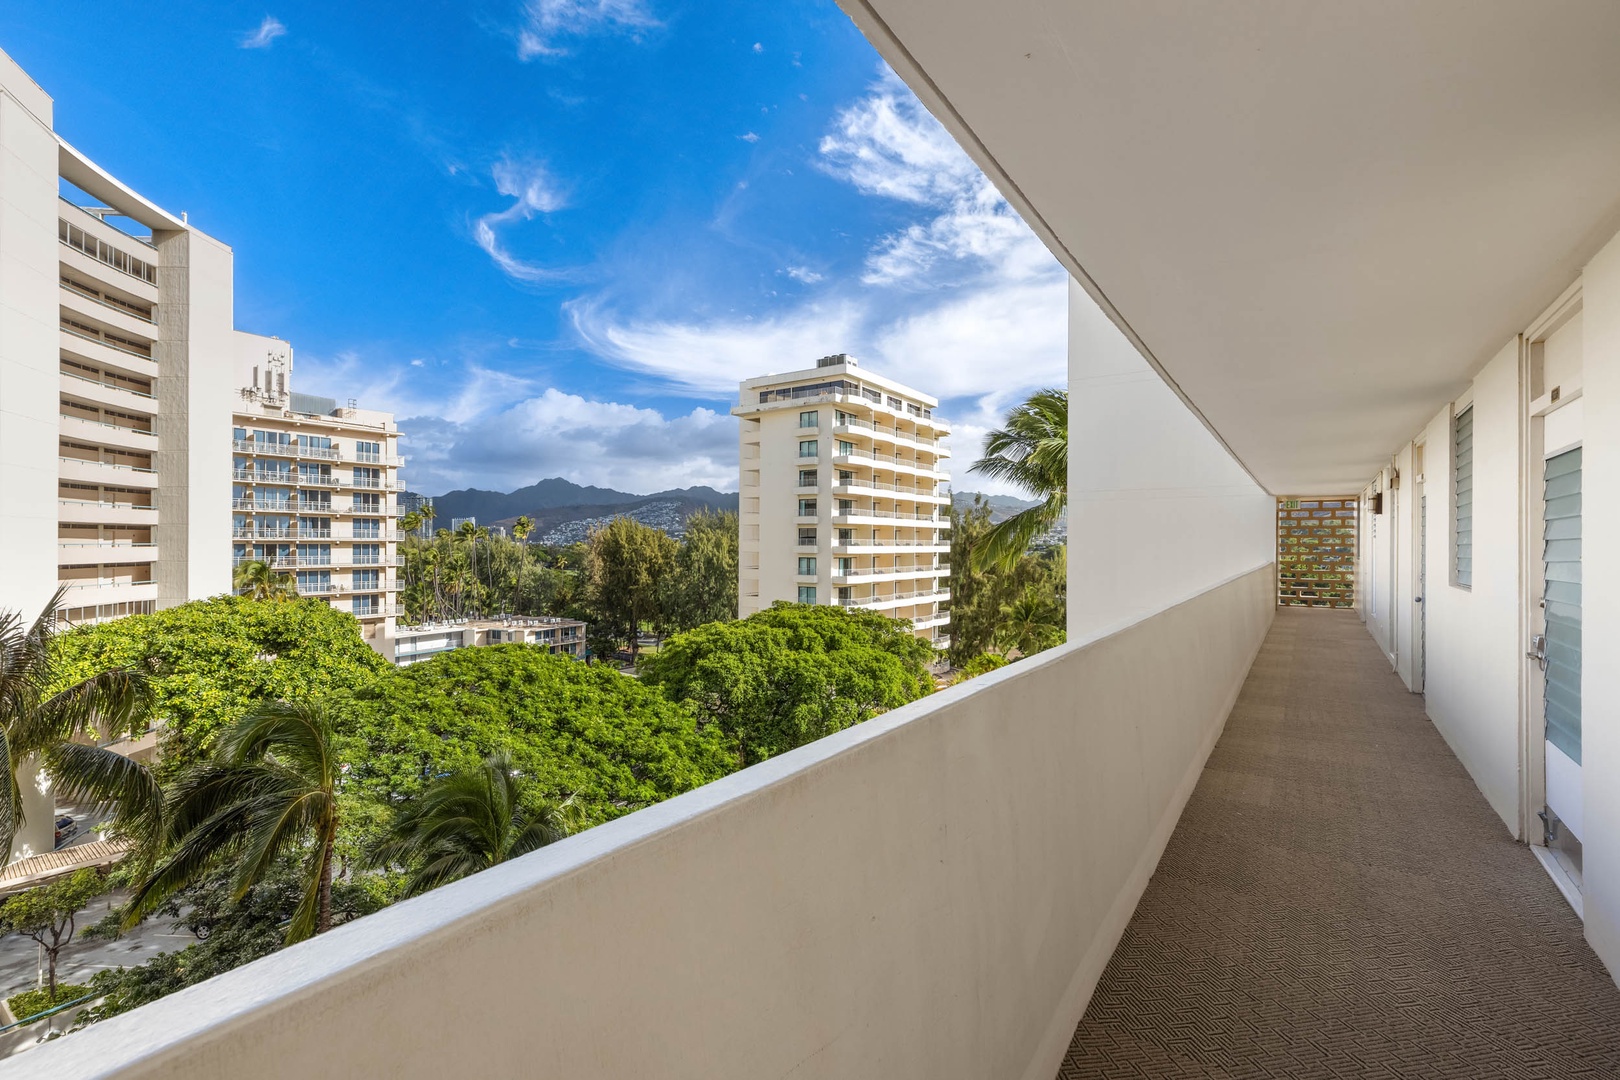 Honolulu Vacation Rentals, Colony Surf Getaway - Urban oasis with a verdant balcony view, offering a serene views from the guest bedroom balcony.